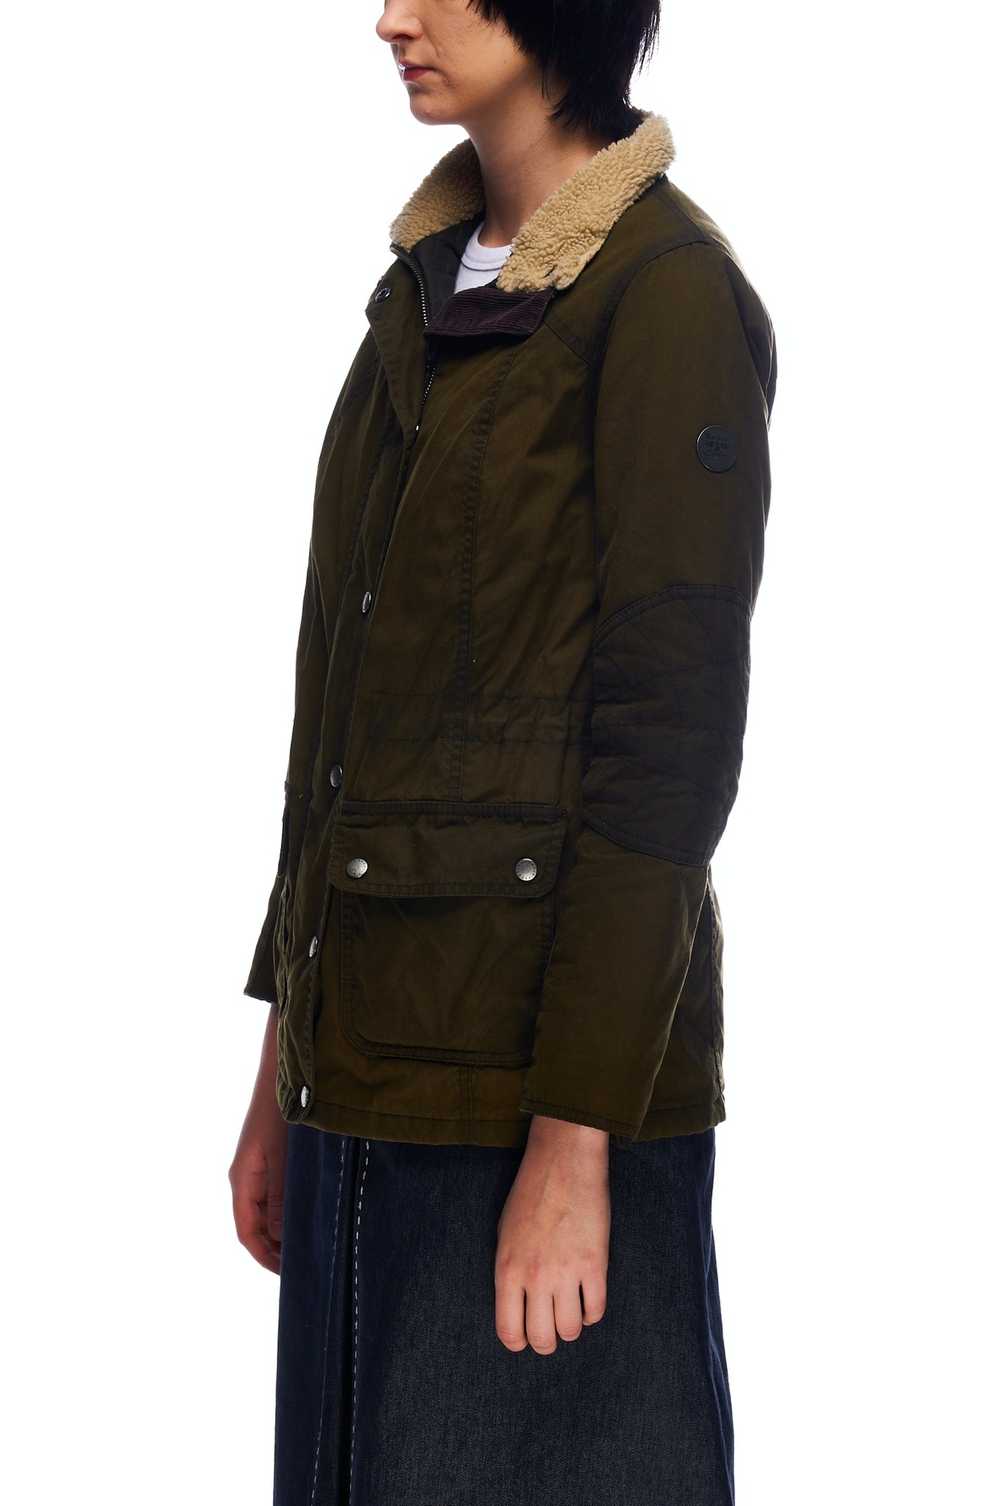 Barbour BARBOUR Jacket Olive Green Wax Cotton - image 3